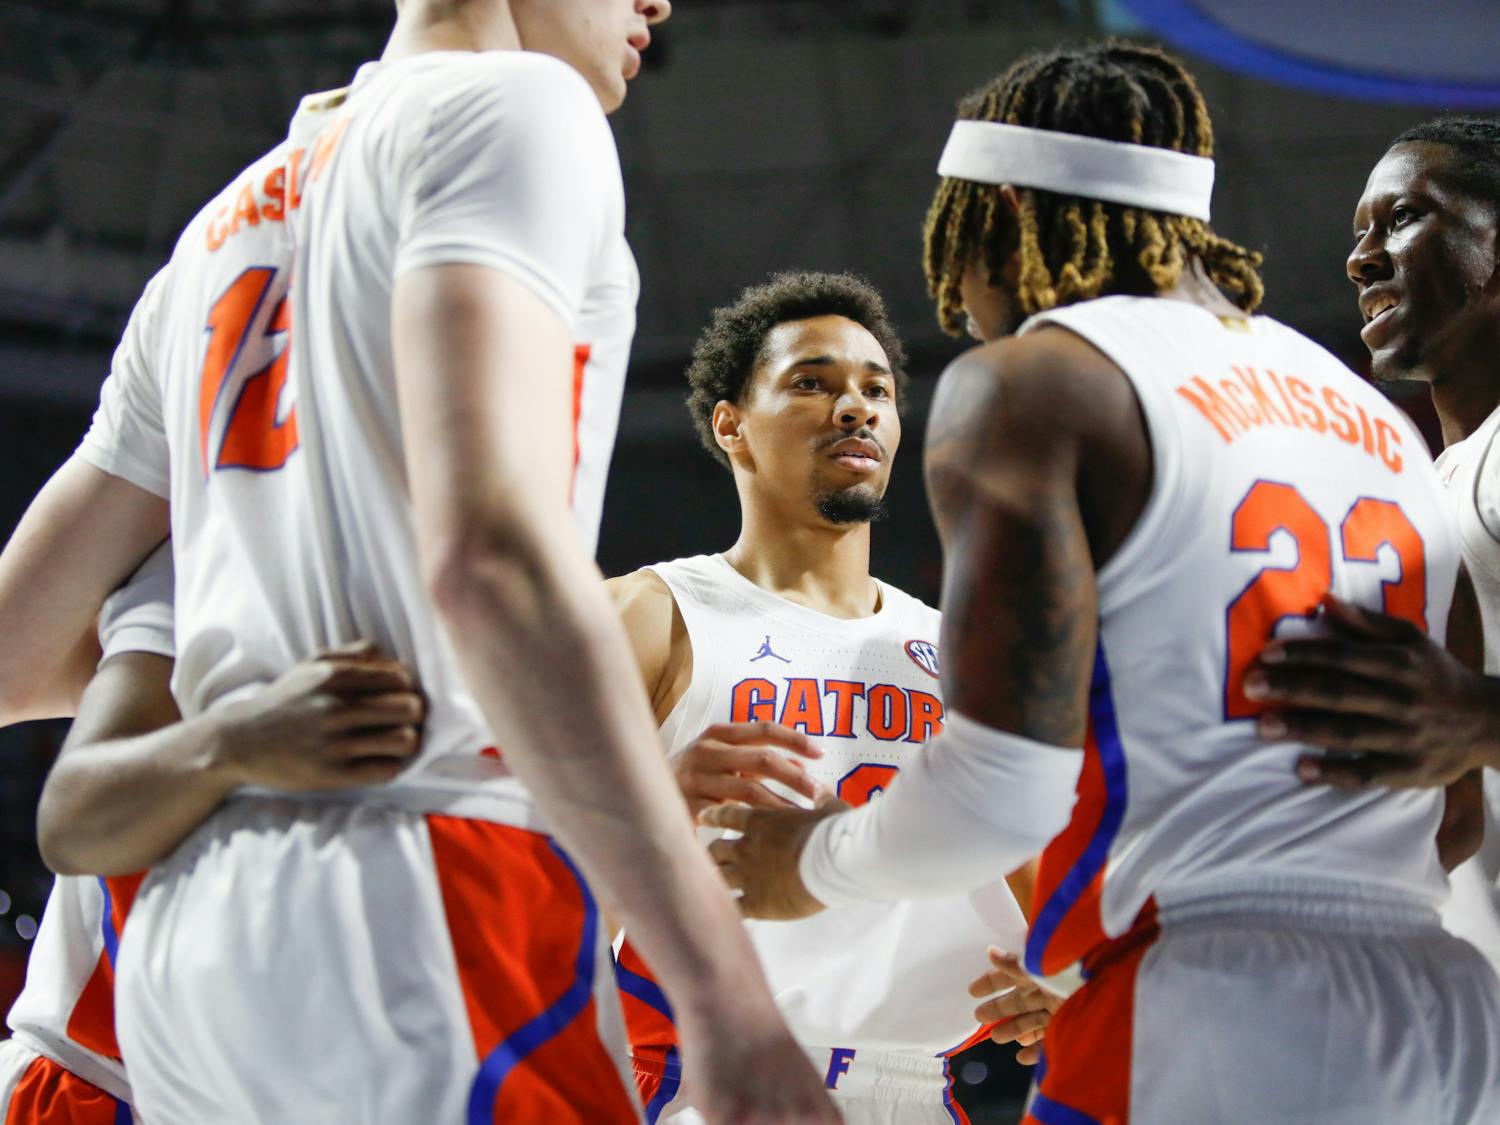 Florida's 2021-22 men's basketball team, pictured during a Nov. 14 game against Florida State